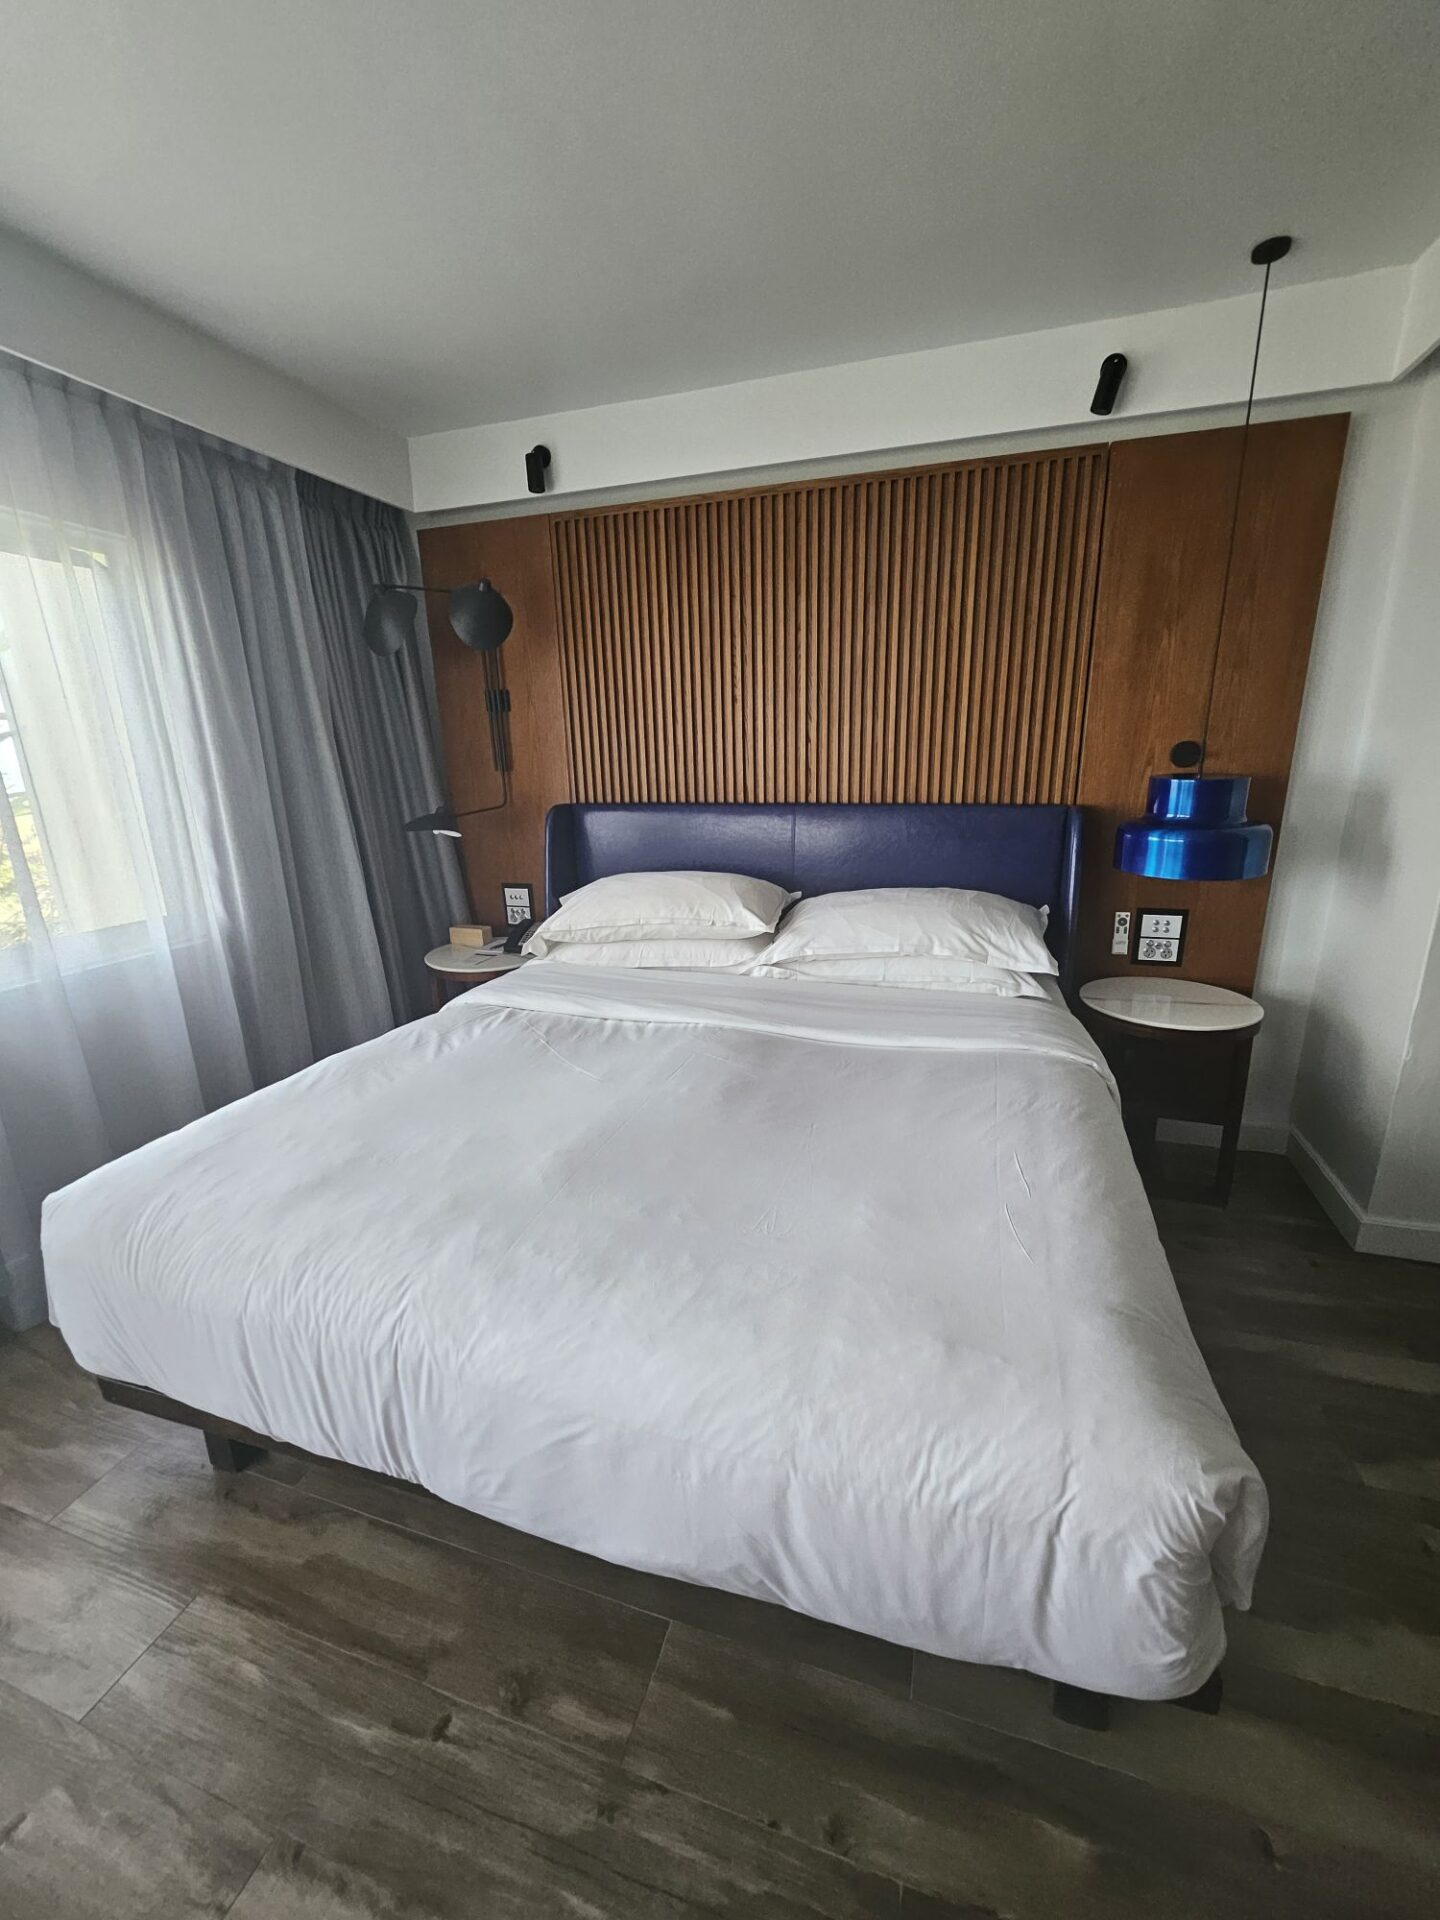 a bed with white sheets and blue headboard in a room